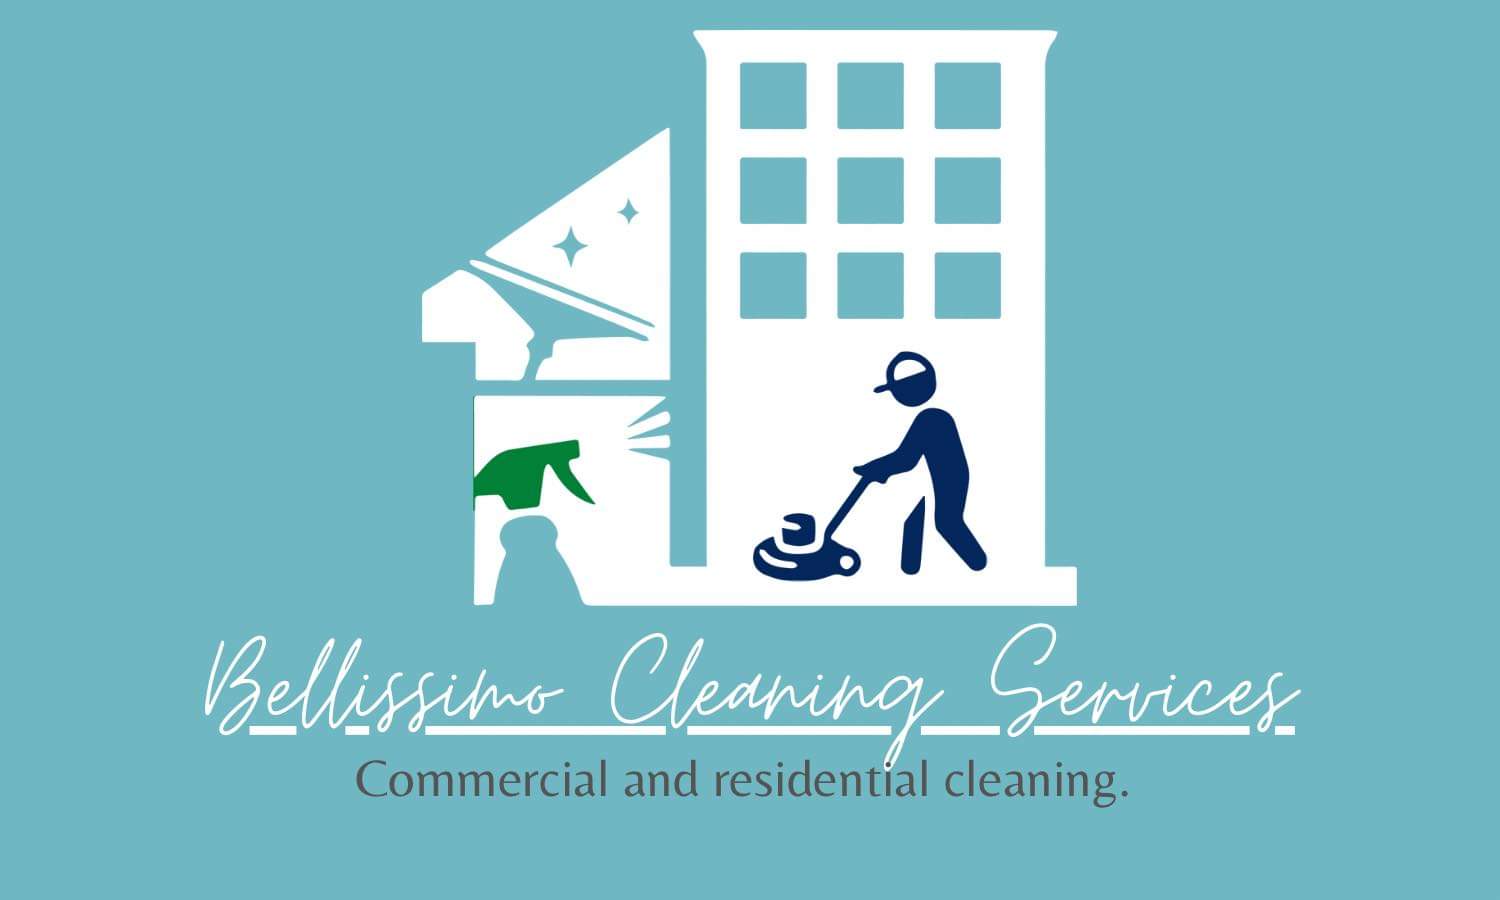 Bellissimo Cleaning Services Logo